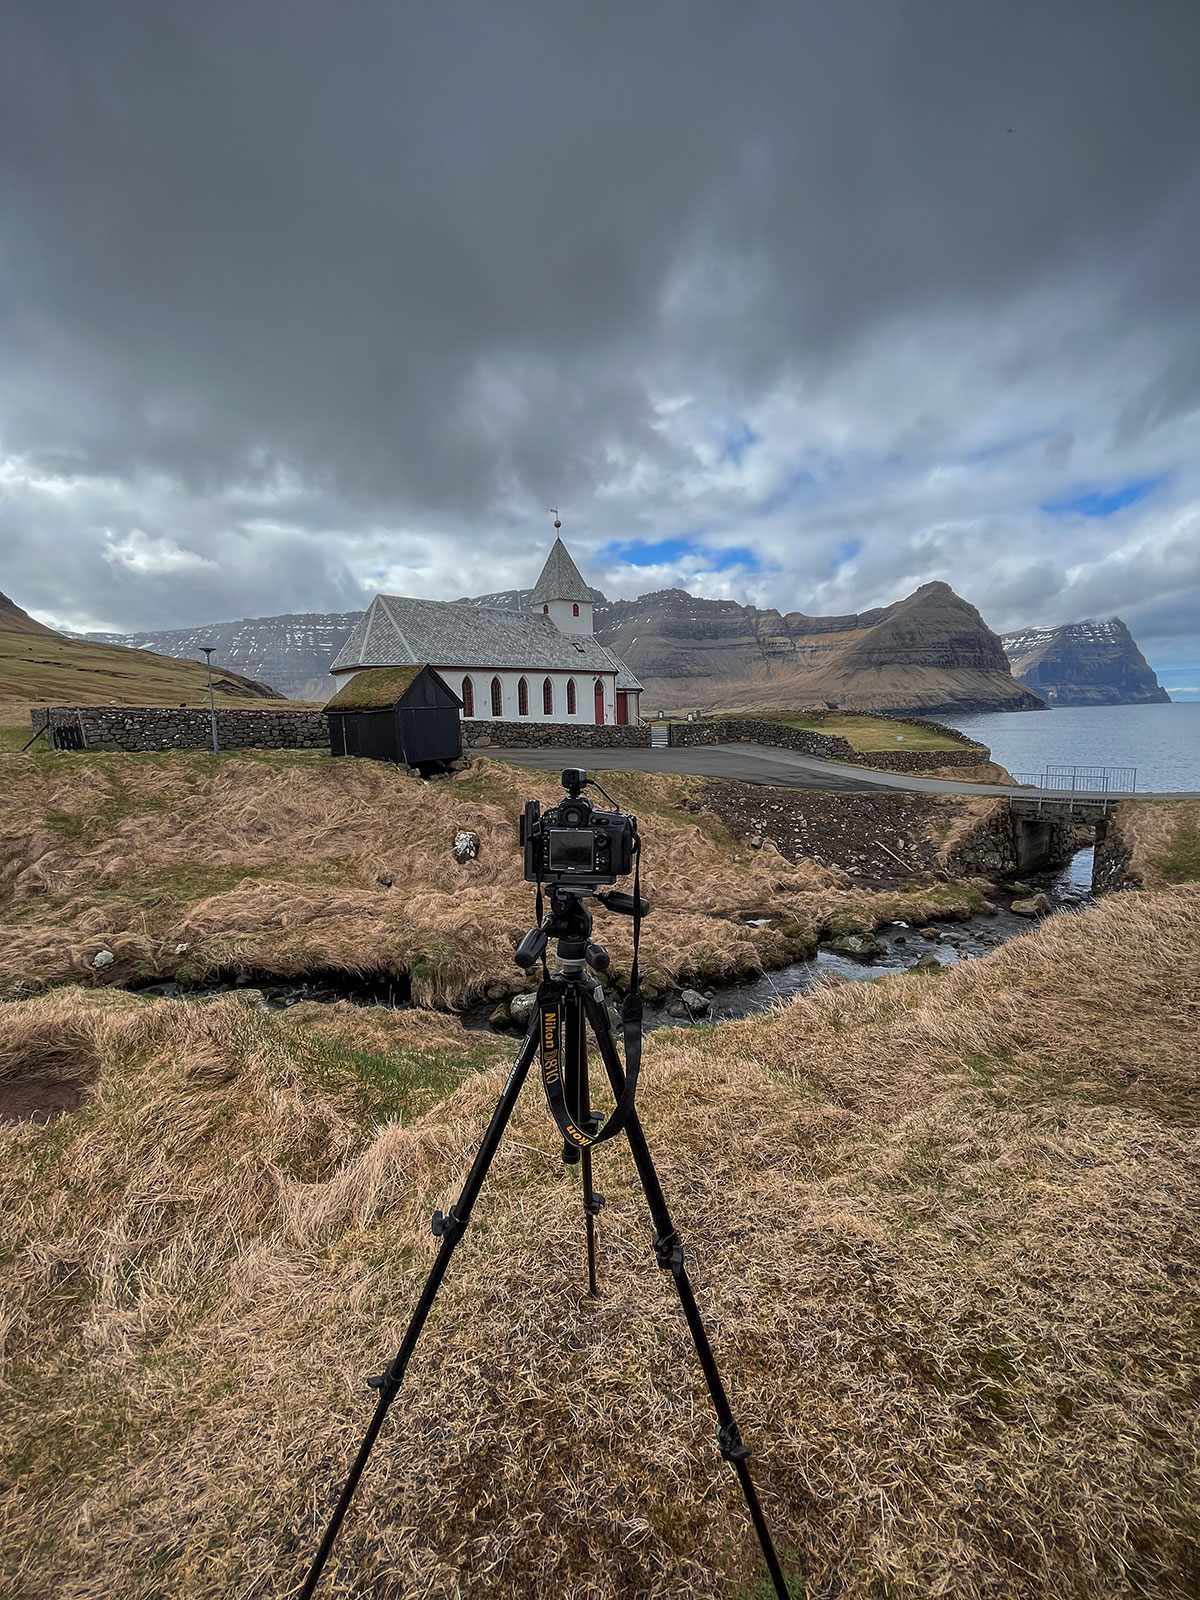 In this scene, my Nikon D810 becomes the storyteller, capturing the timeless beauty of the Church of Viðoy on a remote island in the Faroe archipelago. As the lens focuses on the church, the camera meticulously captures the architectural details against the backdrop of Viðoy's picturesque landscape.